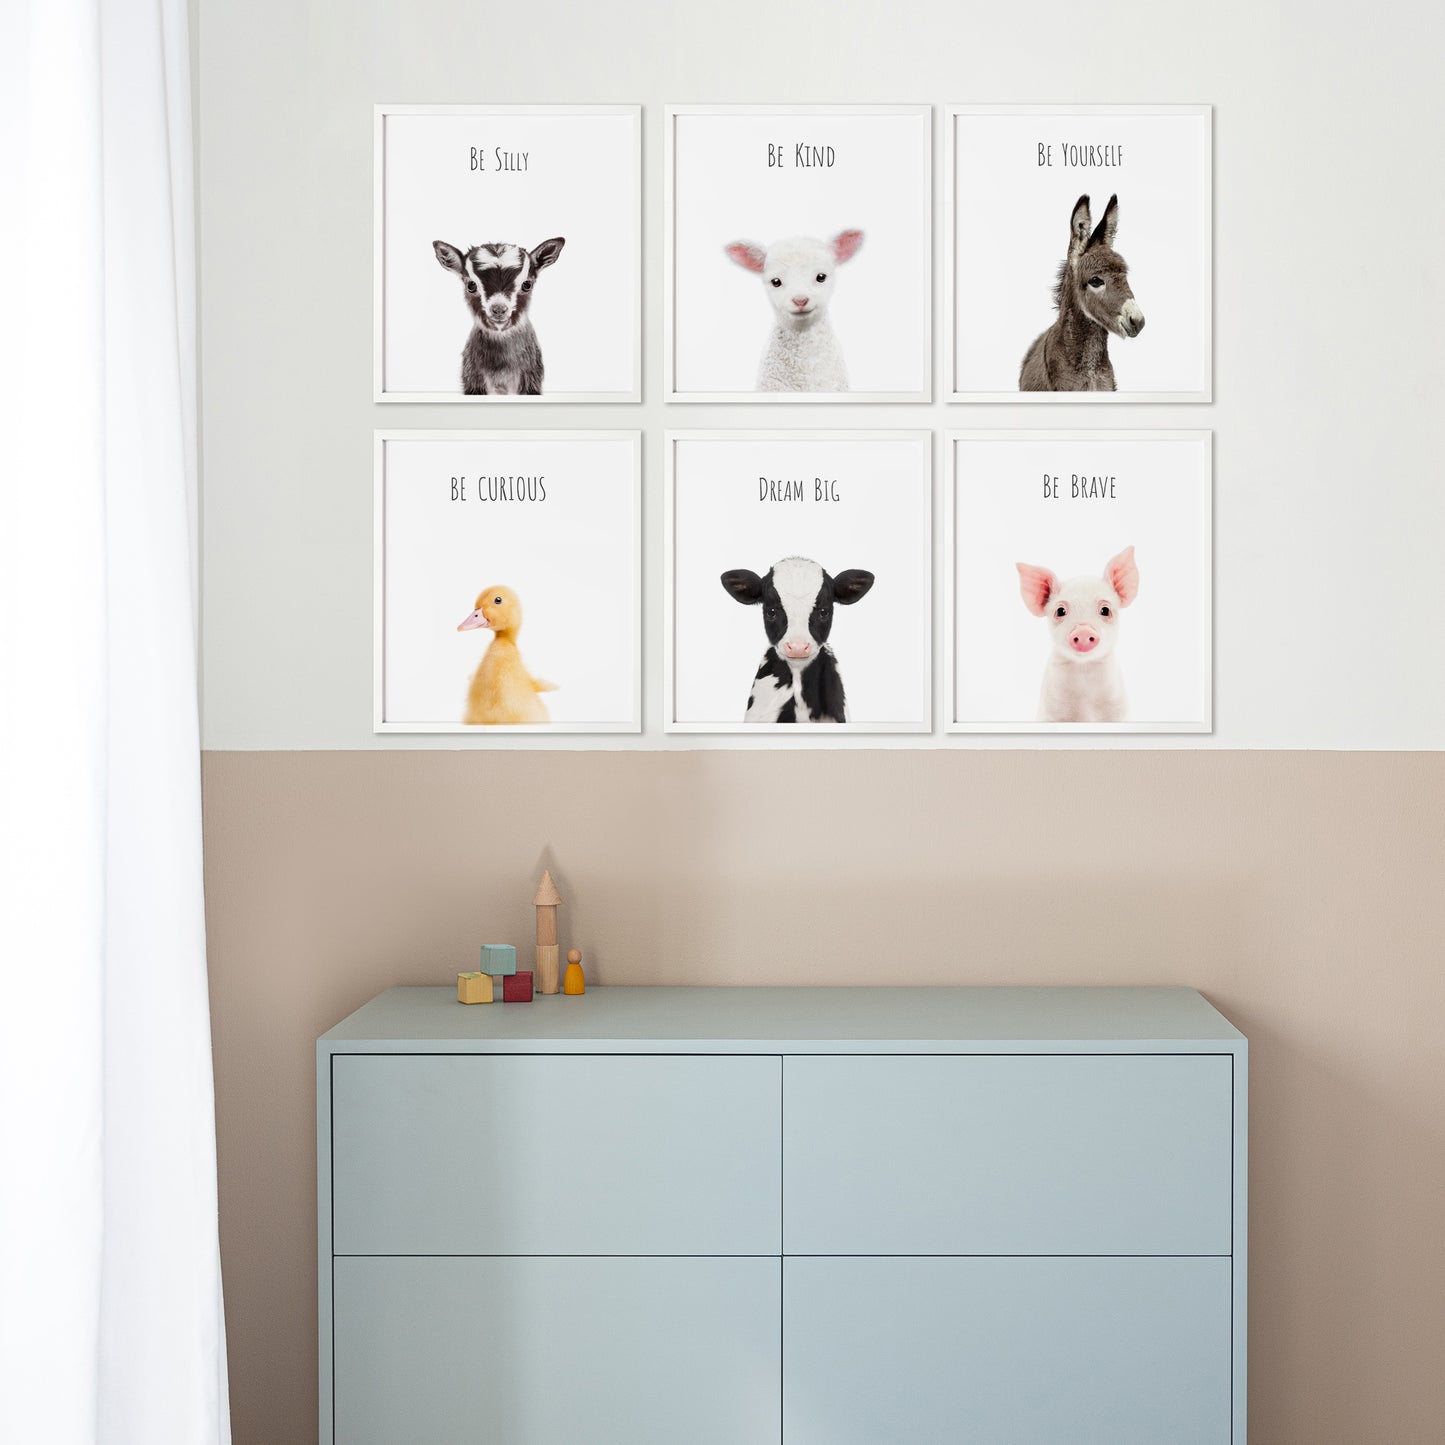 Lamb Be Kind - Positive Affirmations Wall Art for Kids